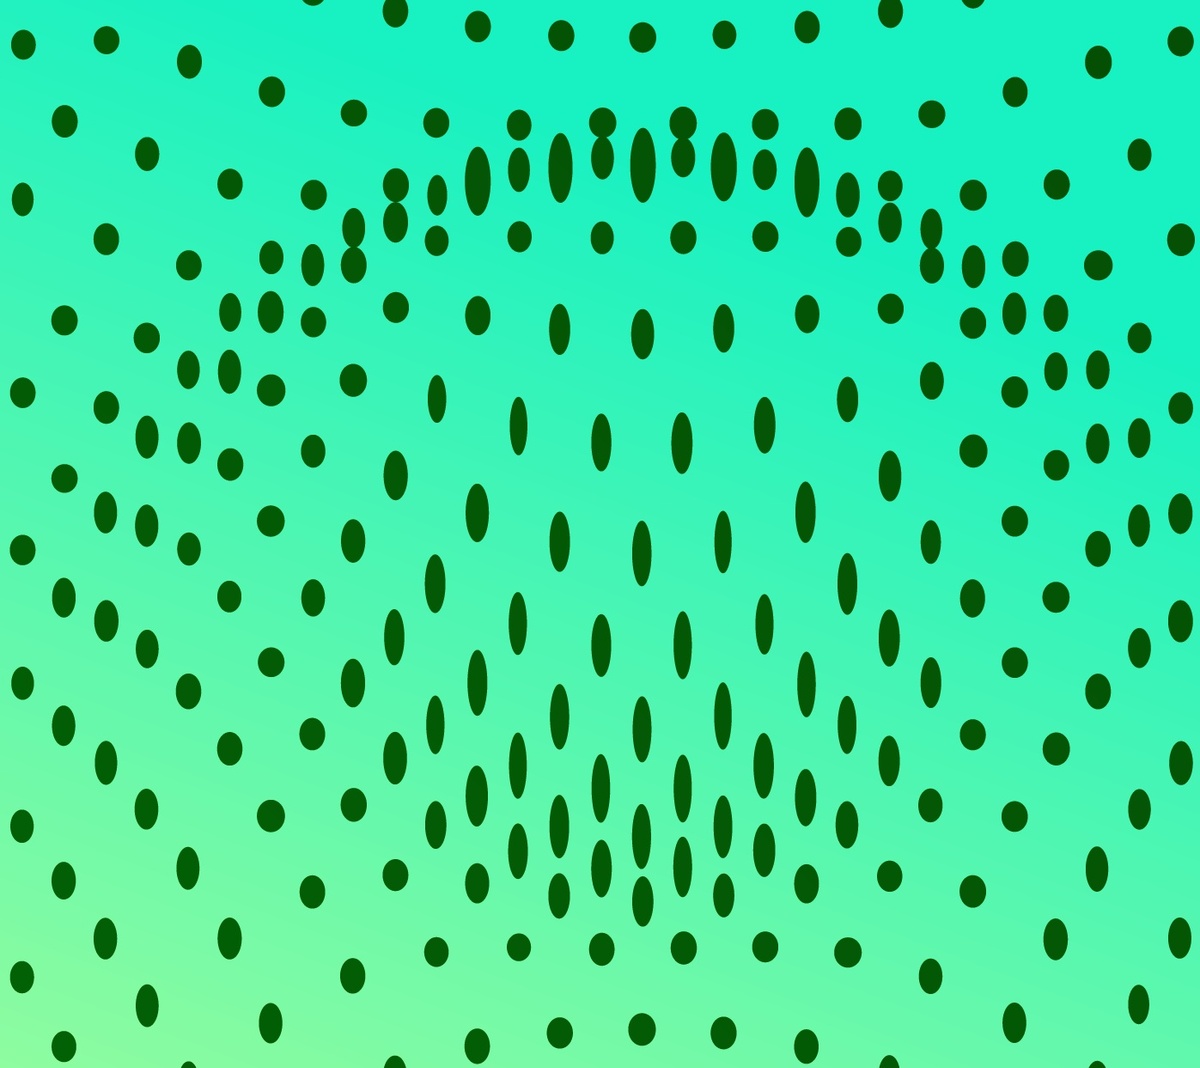 Pattern of dots moving in a graphic formation